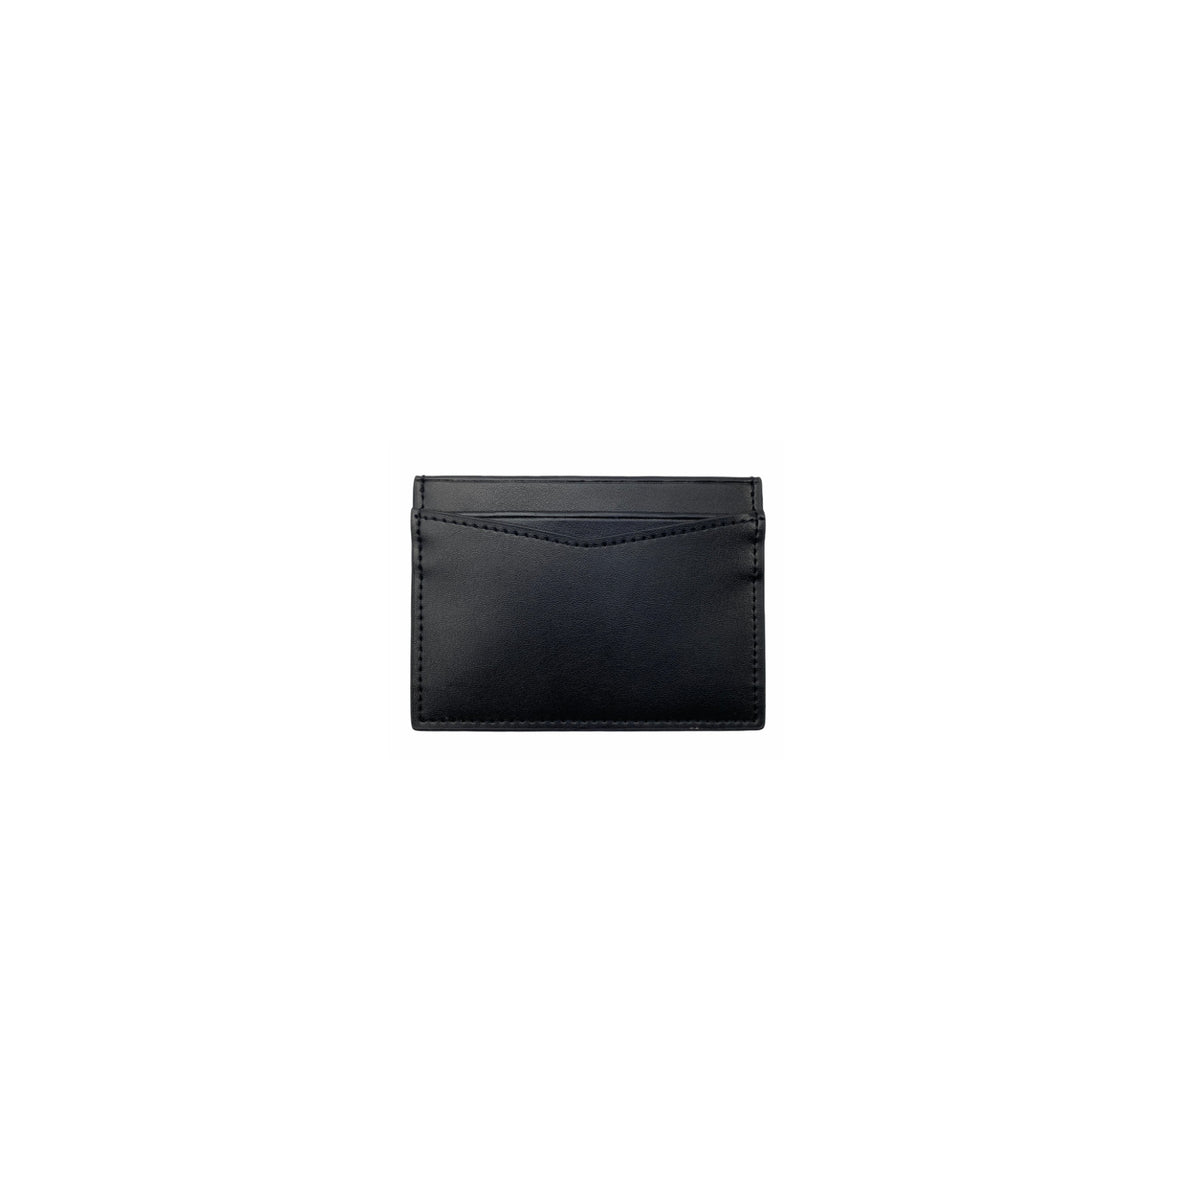 Personalised Card Holder - Black Smooth Leather